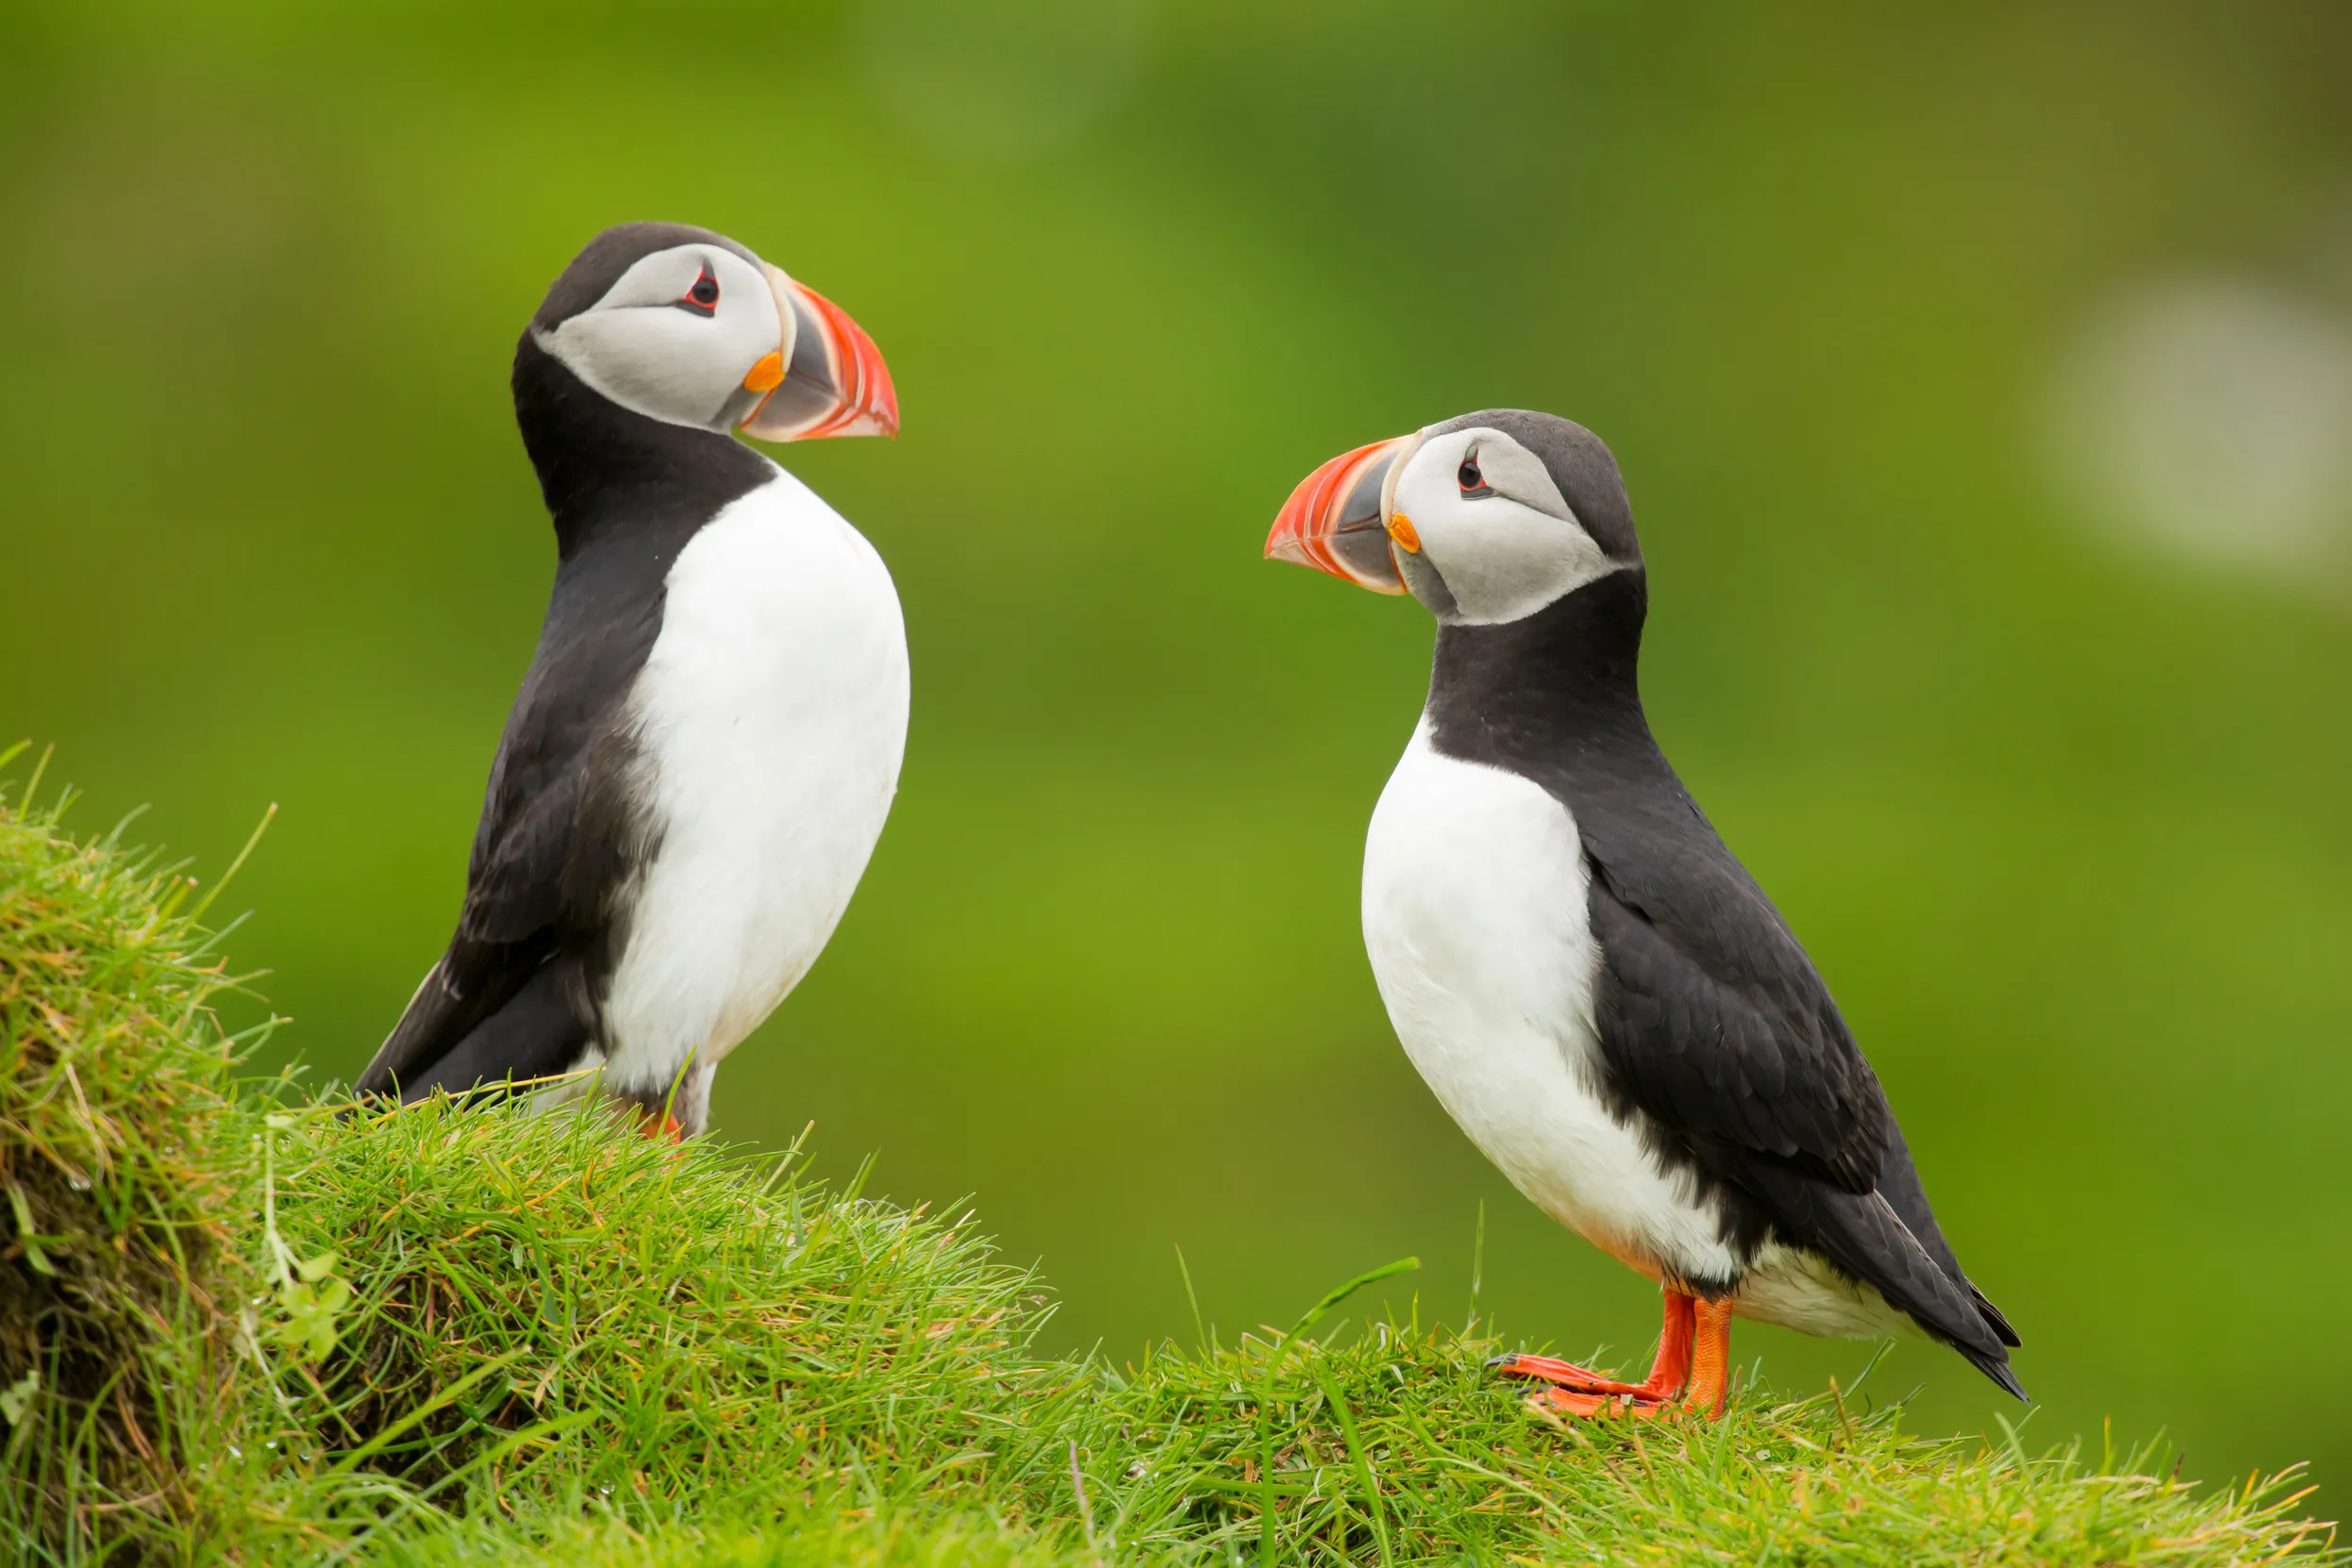 Two Puffins stood on a green cliff.